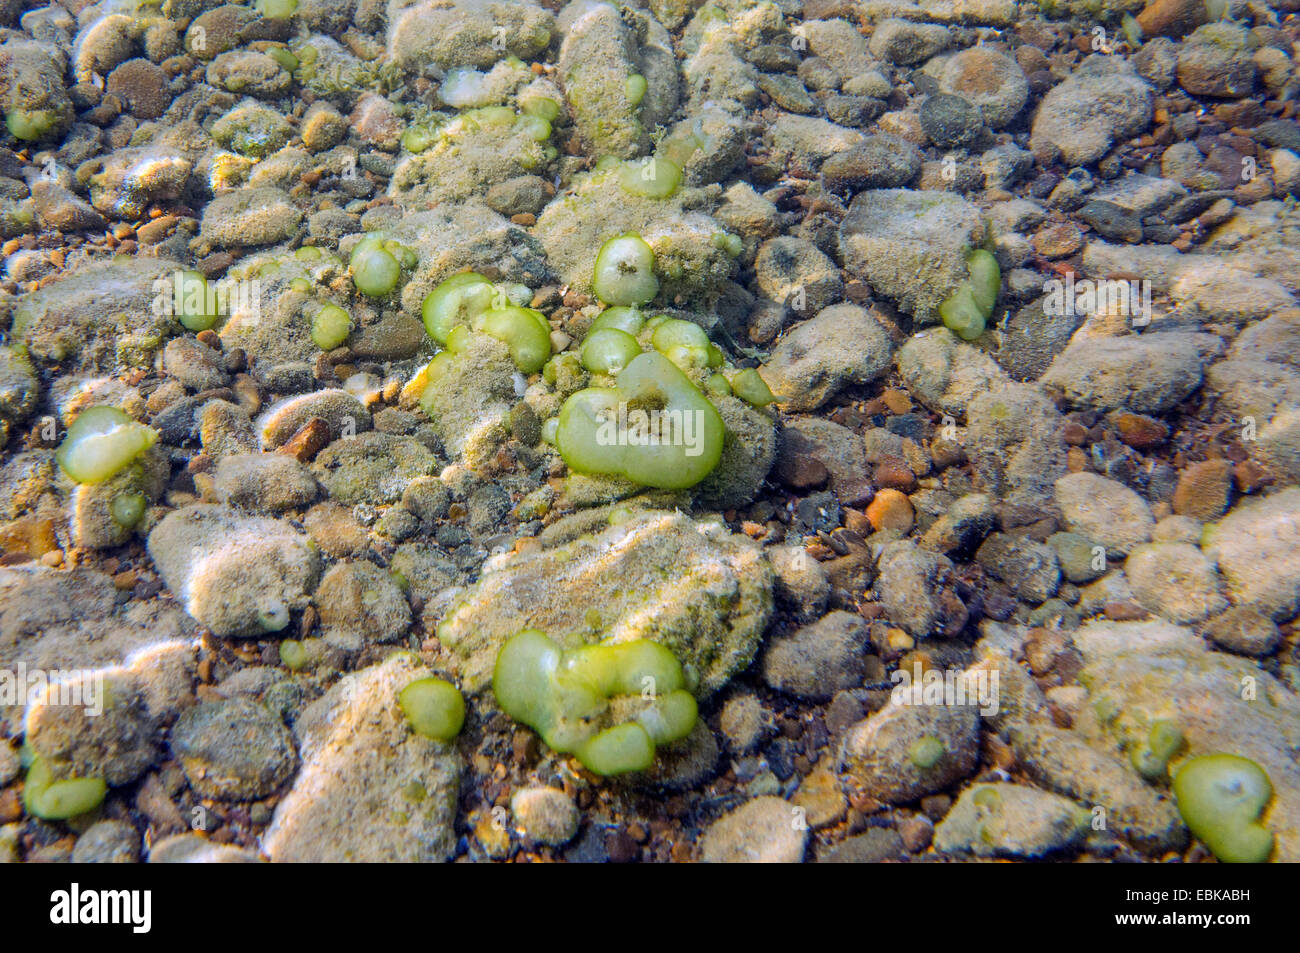 Grren Jelly balls (Ophrydium versatile), colonies on a lake ground, Germany, Bavaria, Lake Chiemsee Stock Photo